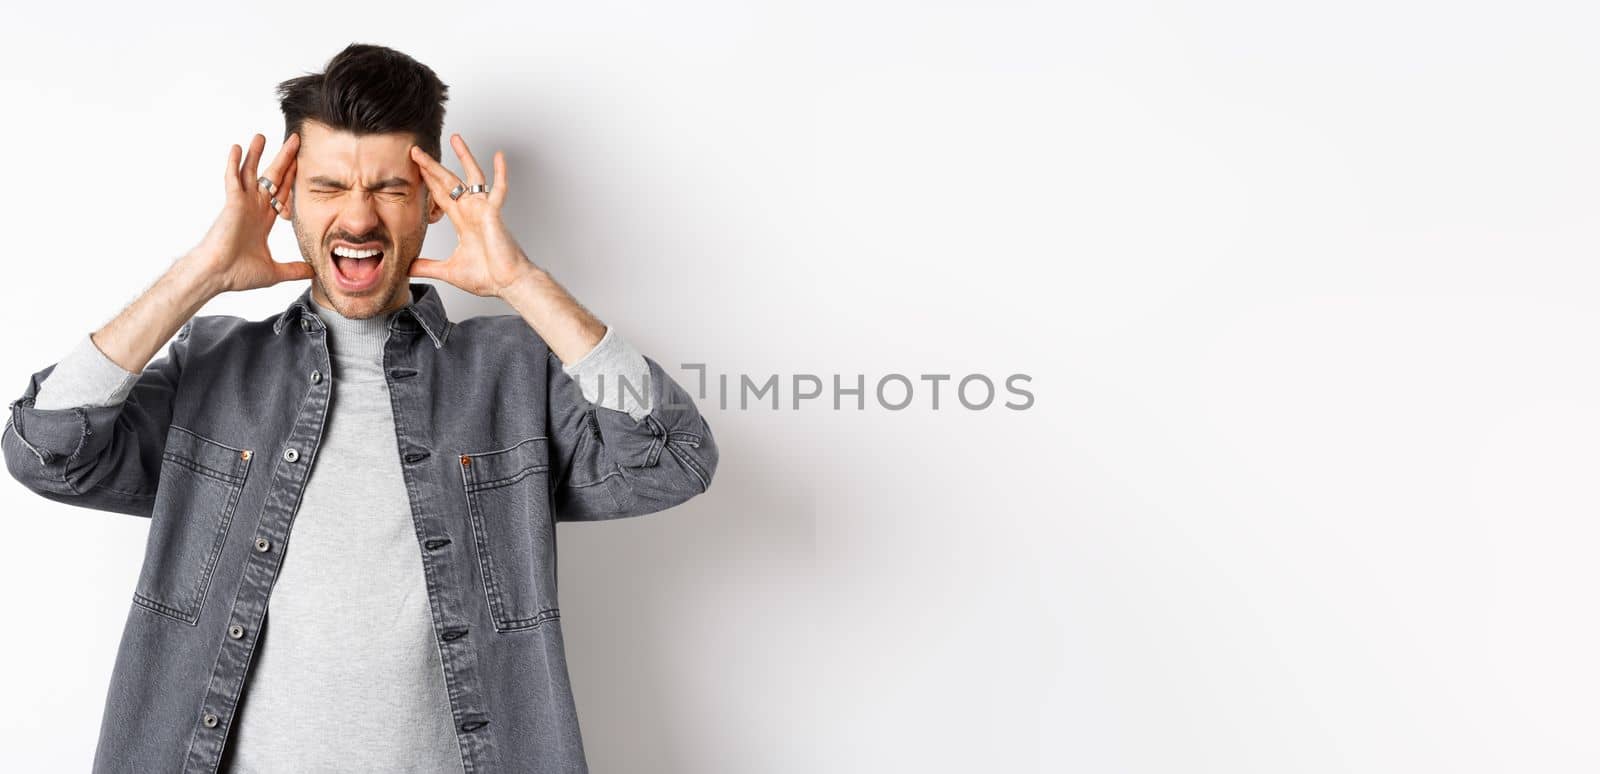 Frustrated young man shouting and touching head distressed, standing bothered by loud noise or headache, standing on white background.